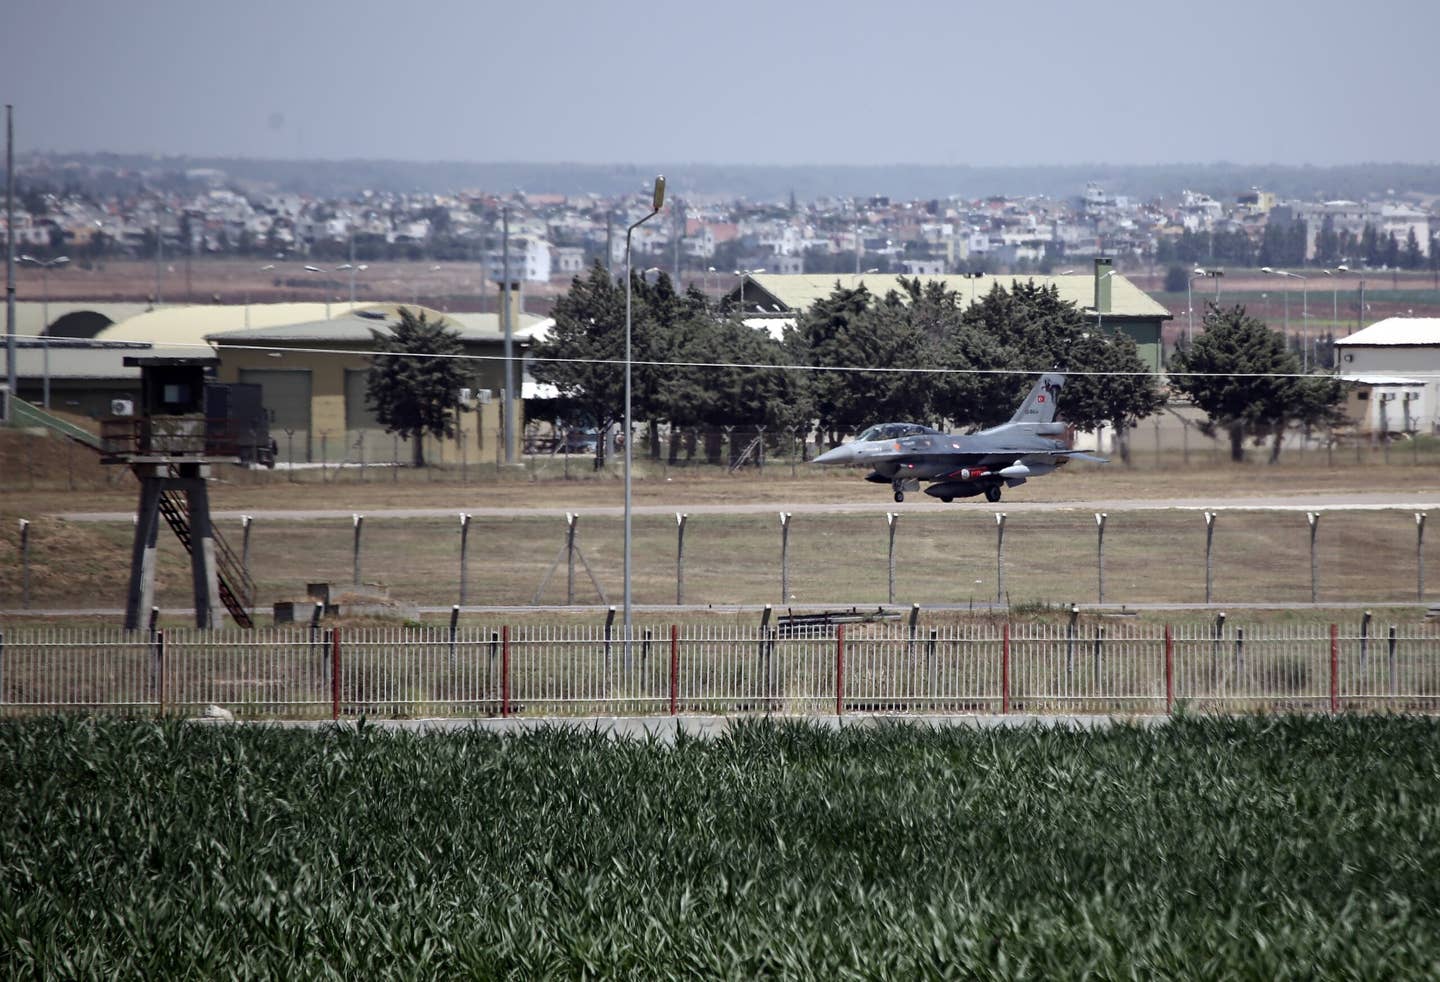 A Turkish Air Force F-16 operates from Incirlik Air Base in the southern province of Adana in July 2015. At the time, Turkish jets were conducting airstrikes on the ISIS terrorist group in Syria as well as the PKK in Iraq, according to Ankara. <em>Photo by Ibrahim Erikan/Anadolu Agency/Getty Images</em>